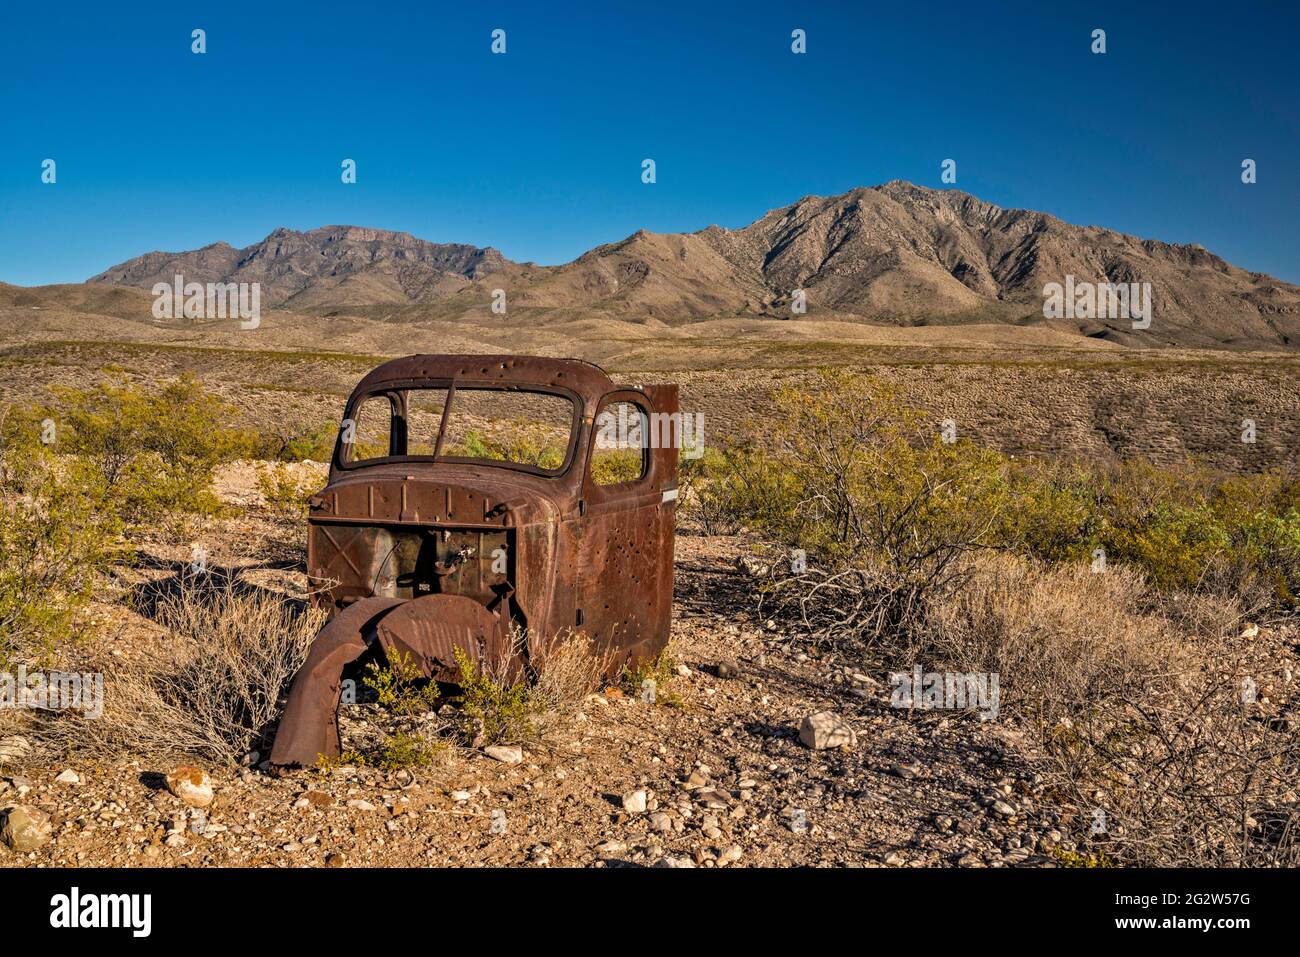 Old Truck Wreck, Sierra Parda (Little Chinati Peak) sur la droite, Chinati Peak sur la gauche, Chinati Mountains, Pinto Canyon Road, Big Bend Country, Texas, ÉTATS-UNIS Banque D'Images